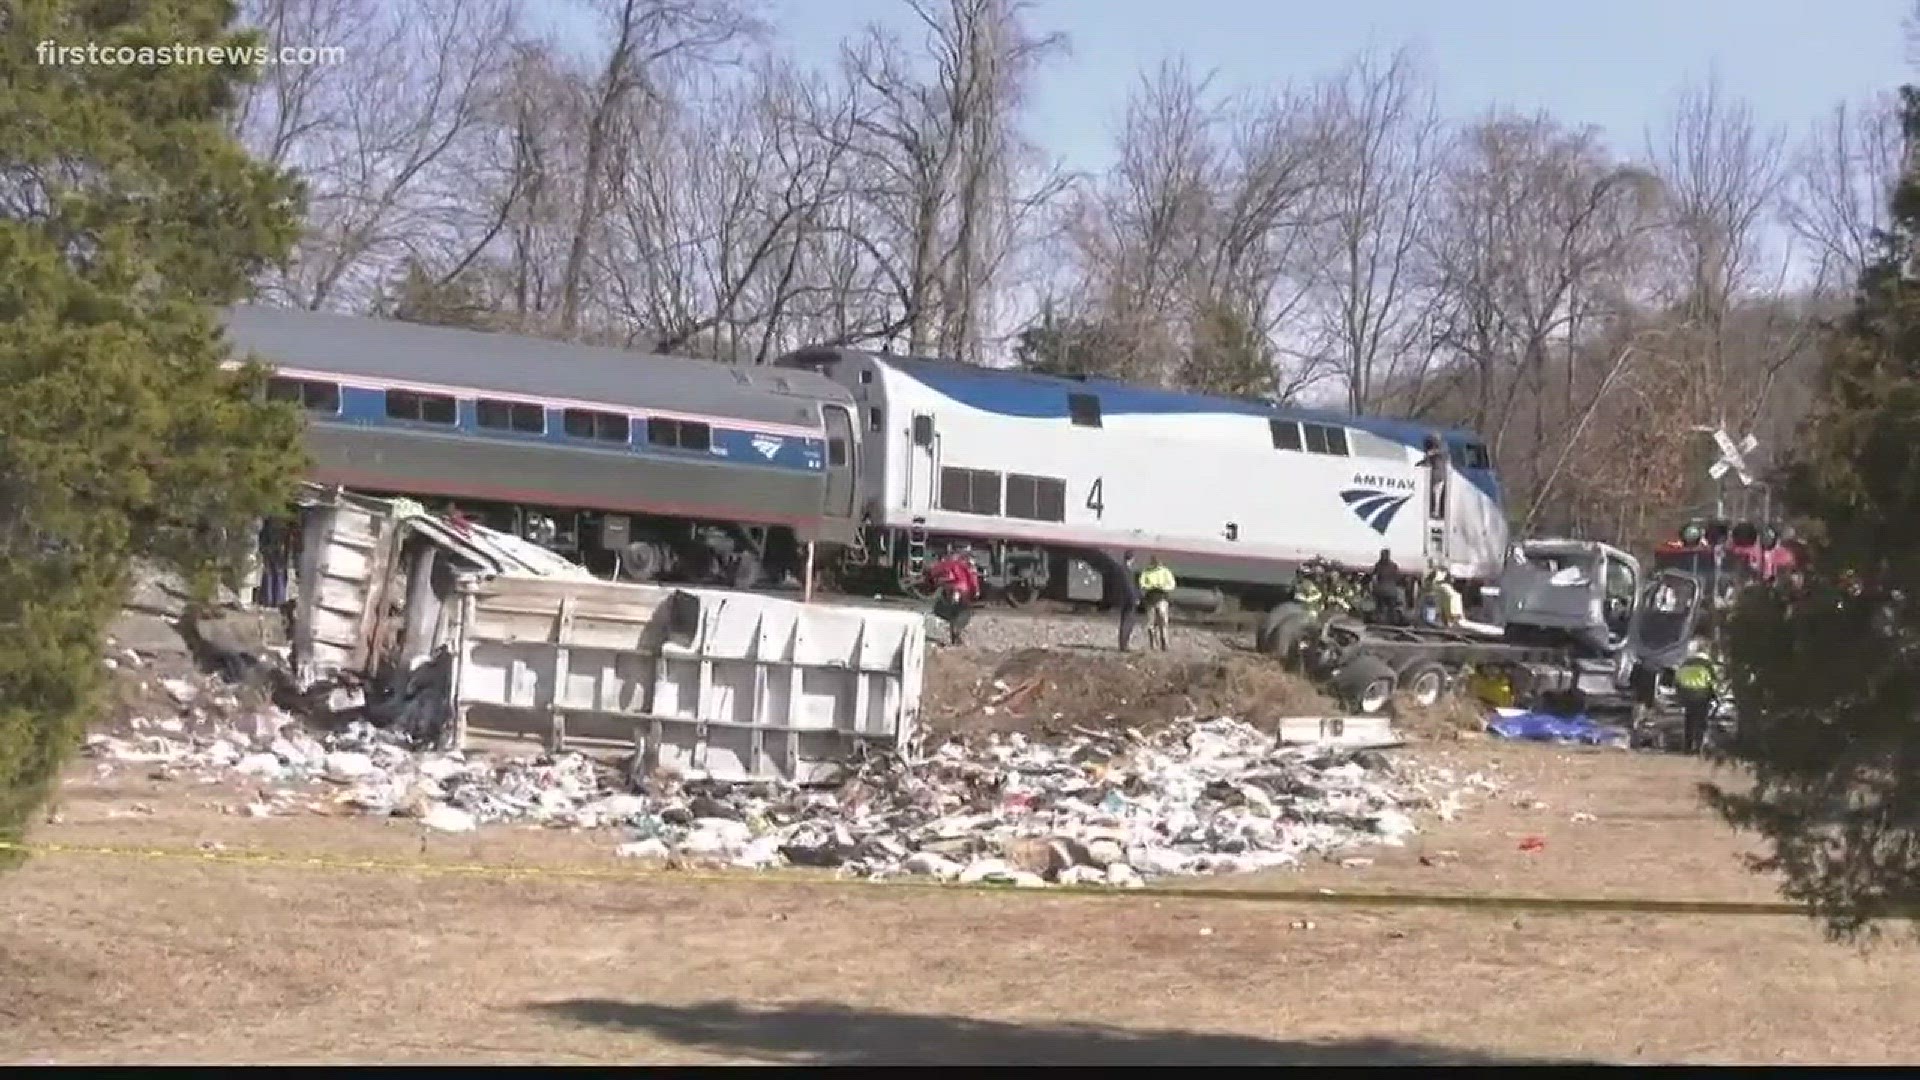 Republican members of Congress jumped into action after their train collided with a garbage truck in rural Virginia on Wednesday, in a crash that left one person dead and others wounded. One lawmakers administered CPR and others carried an injured person